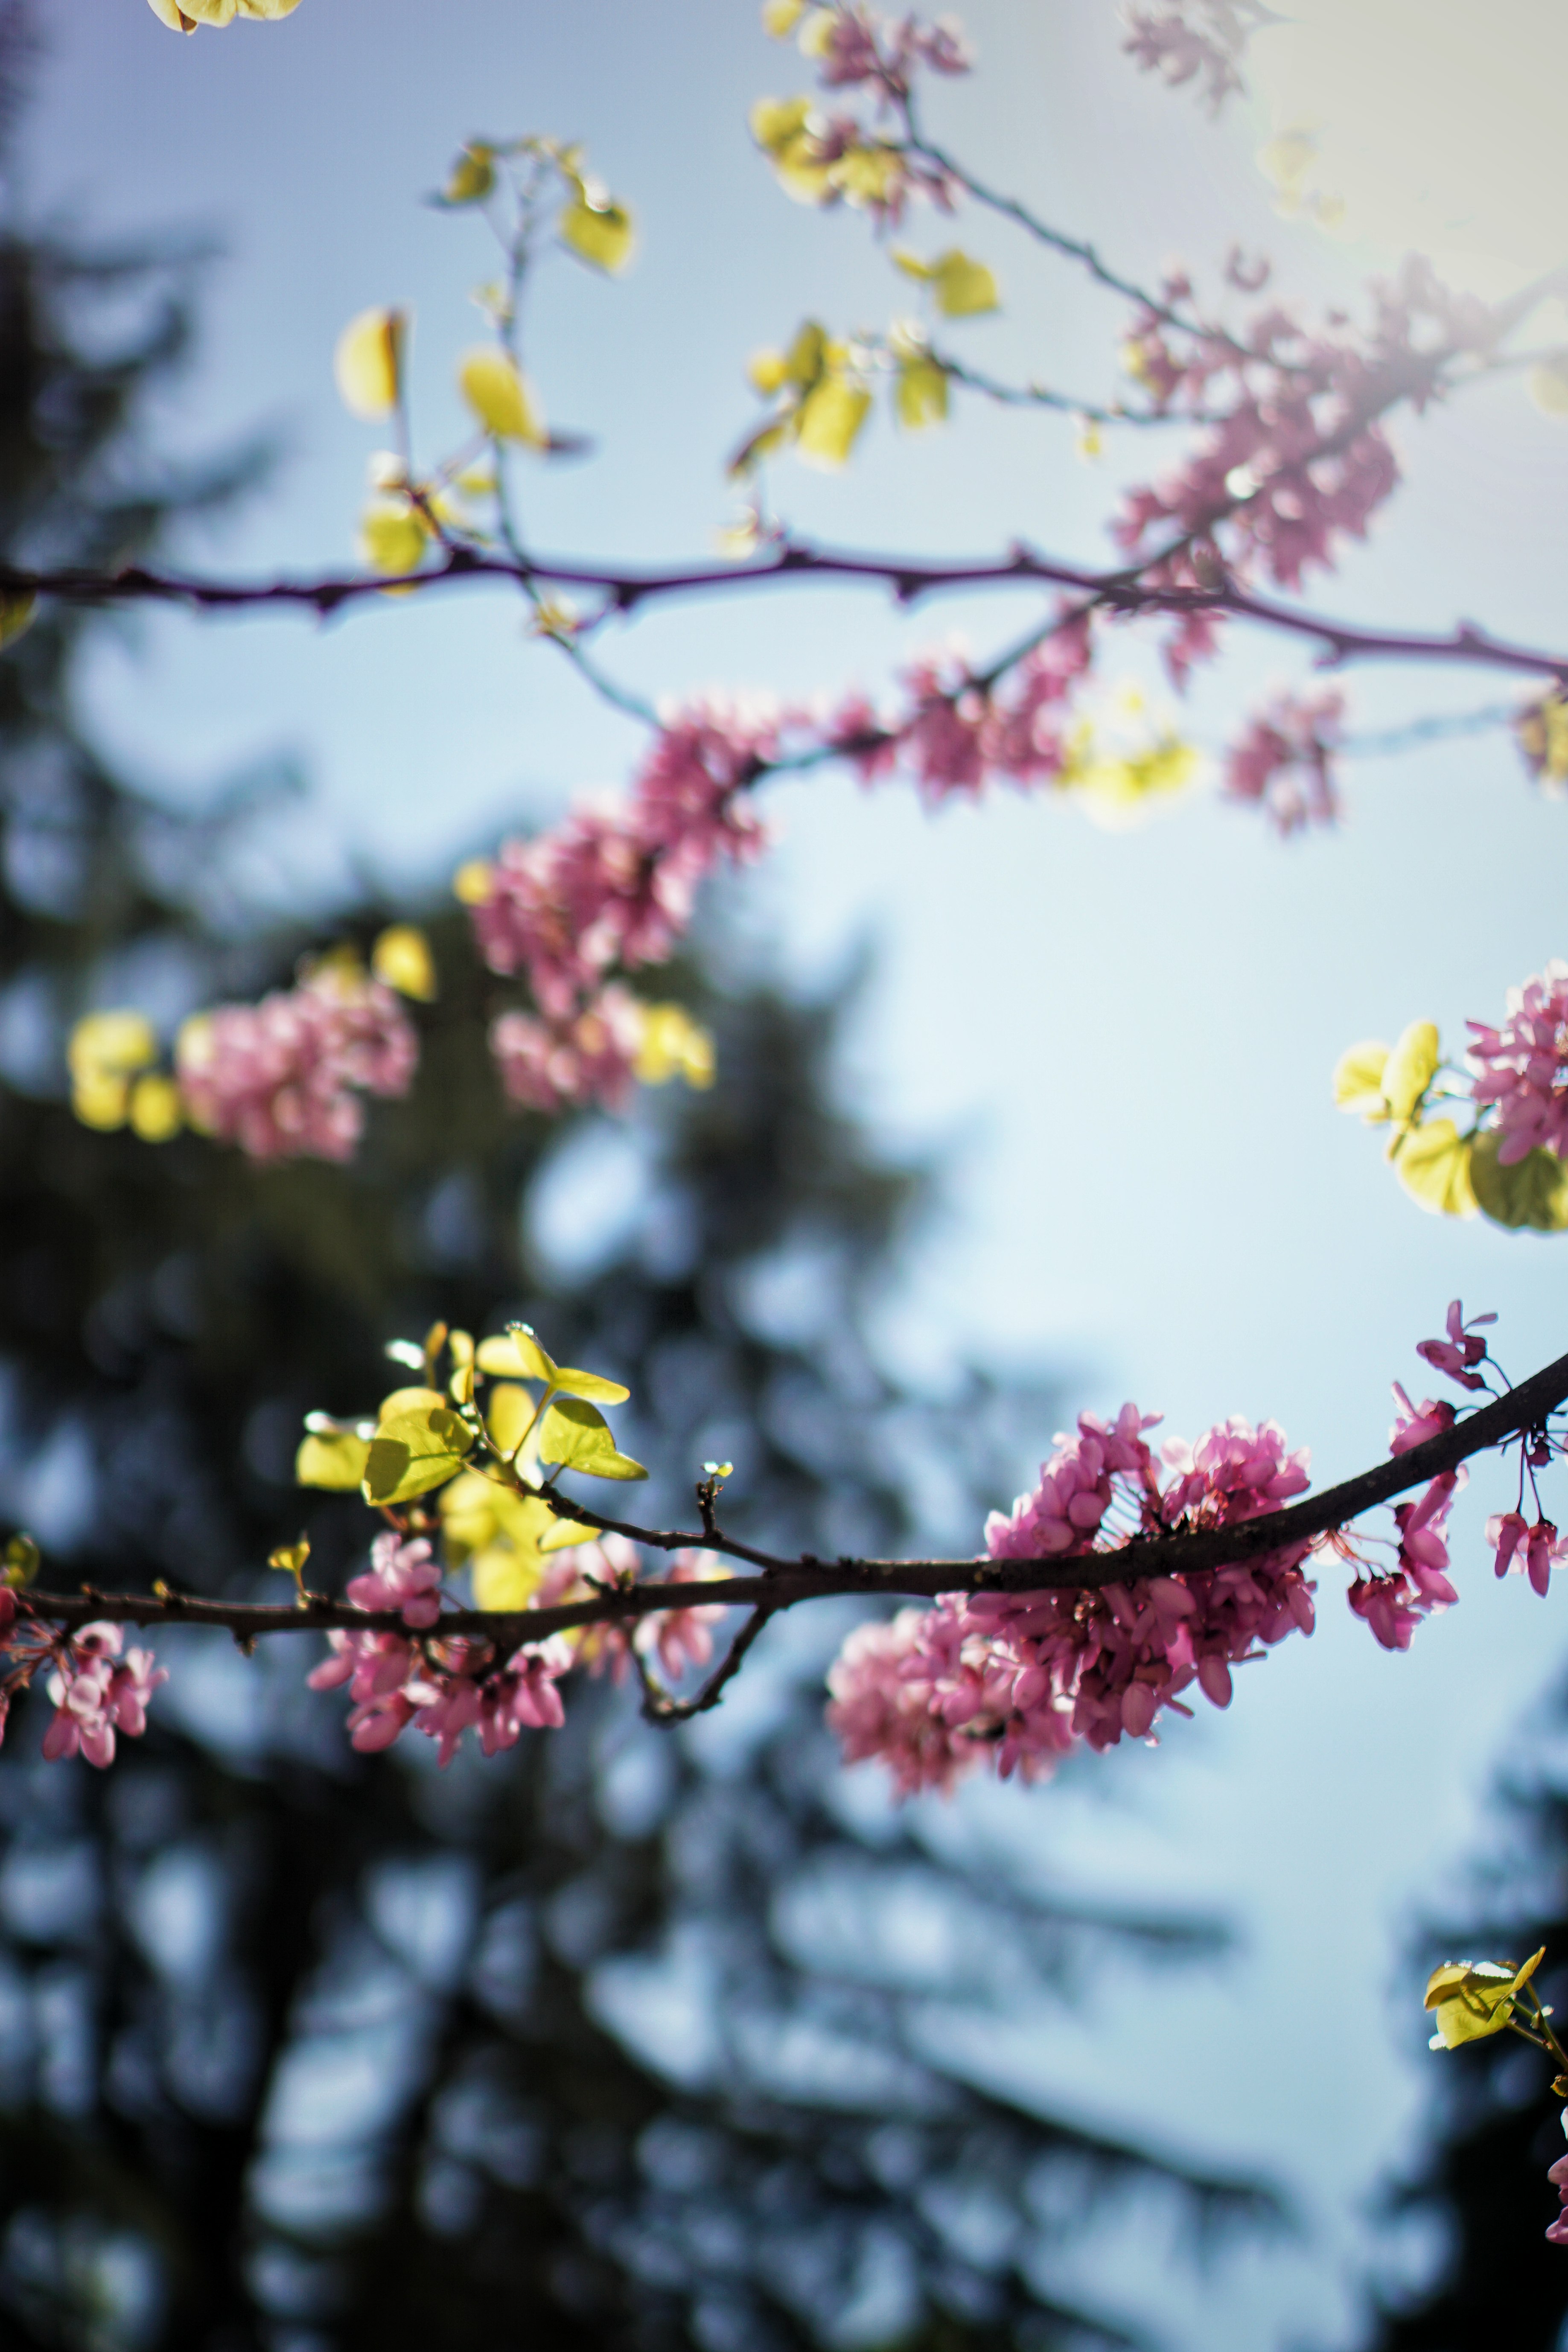 yellow and pink flowers on brown tree branch